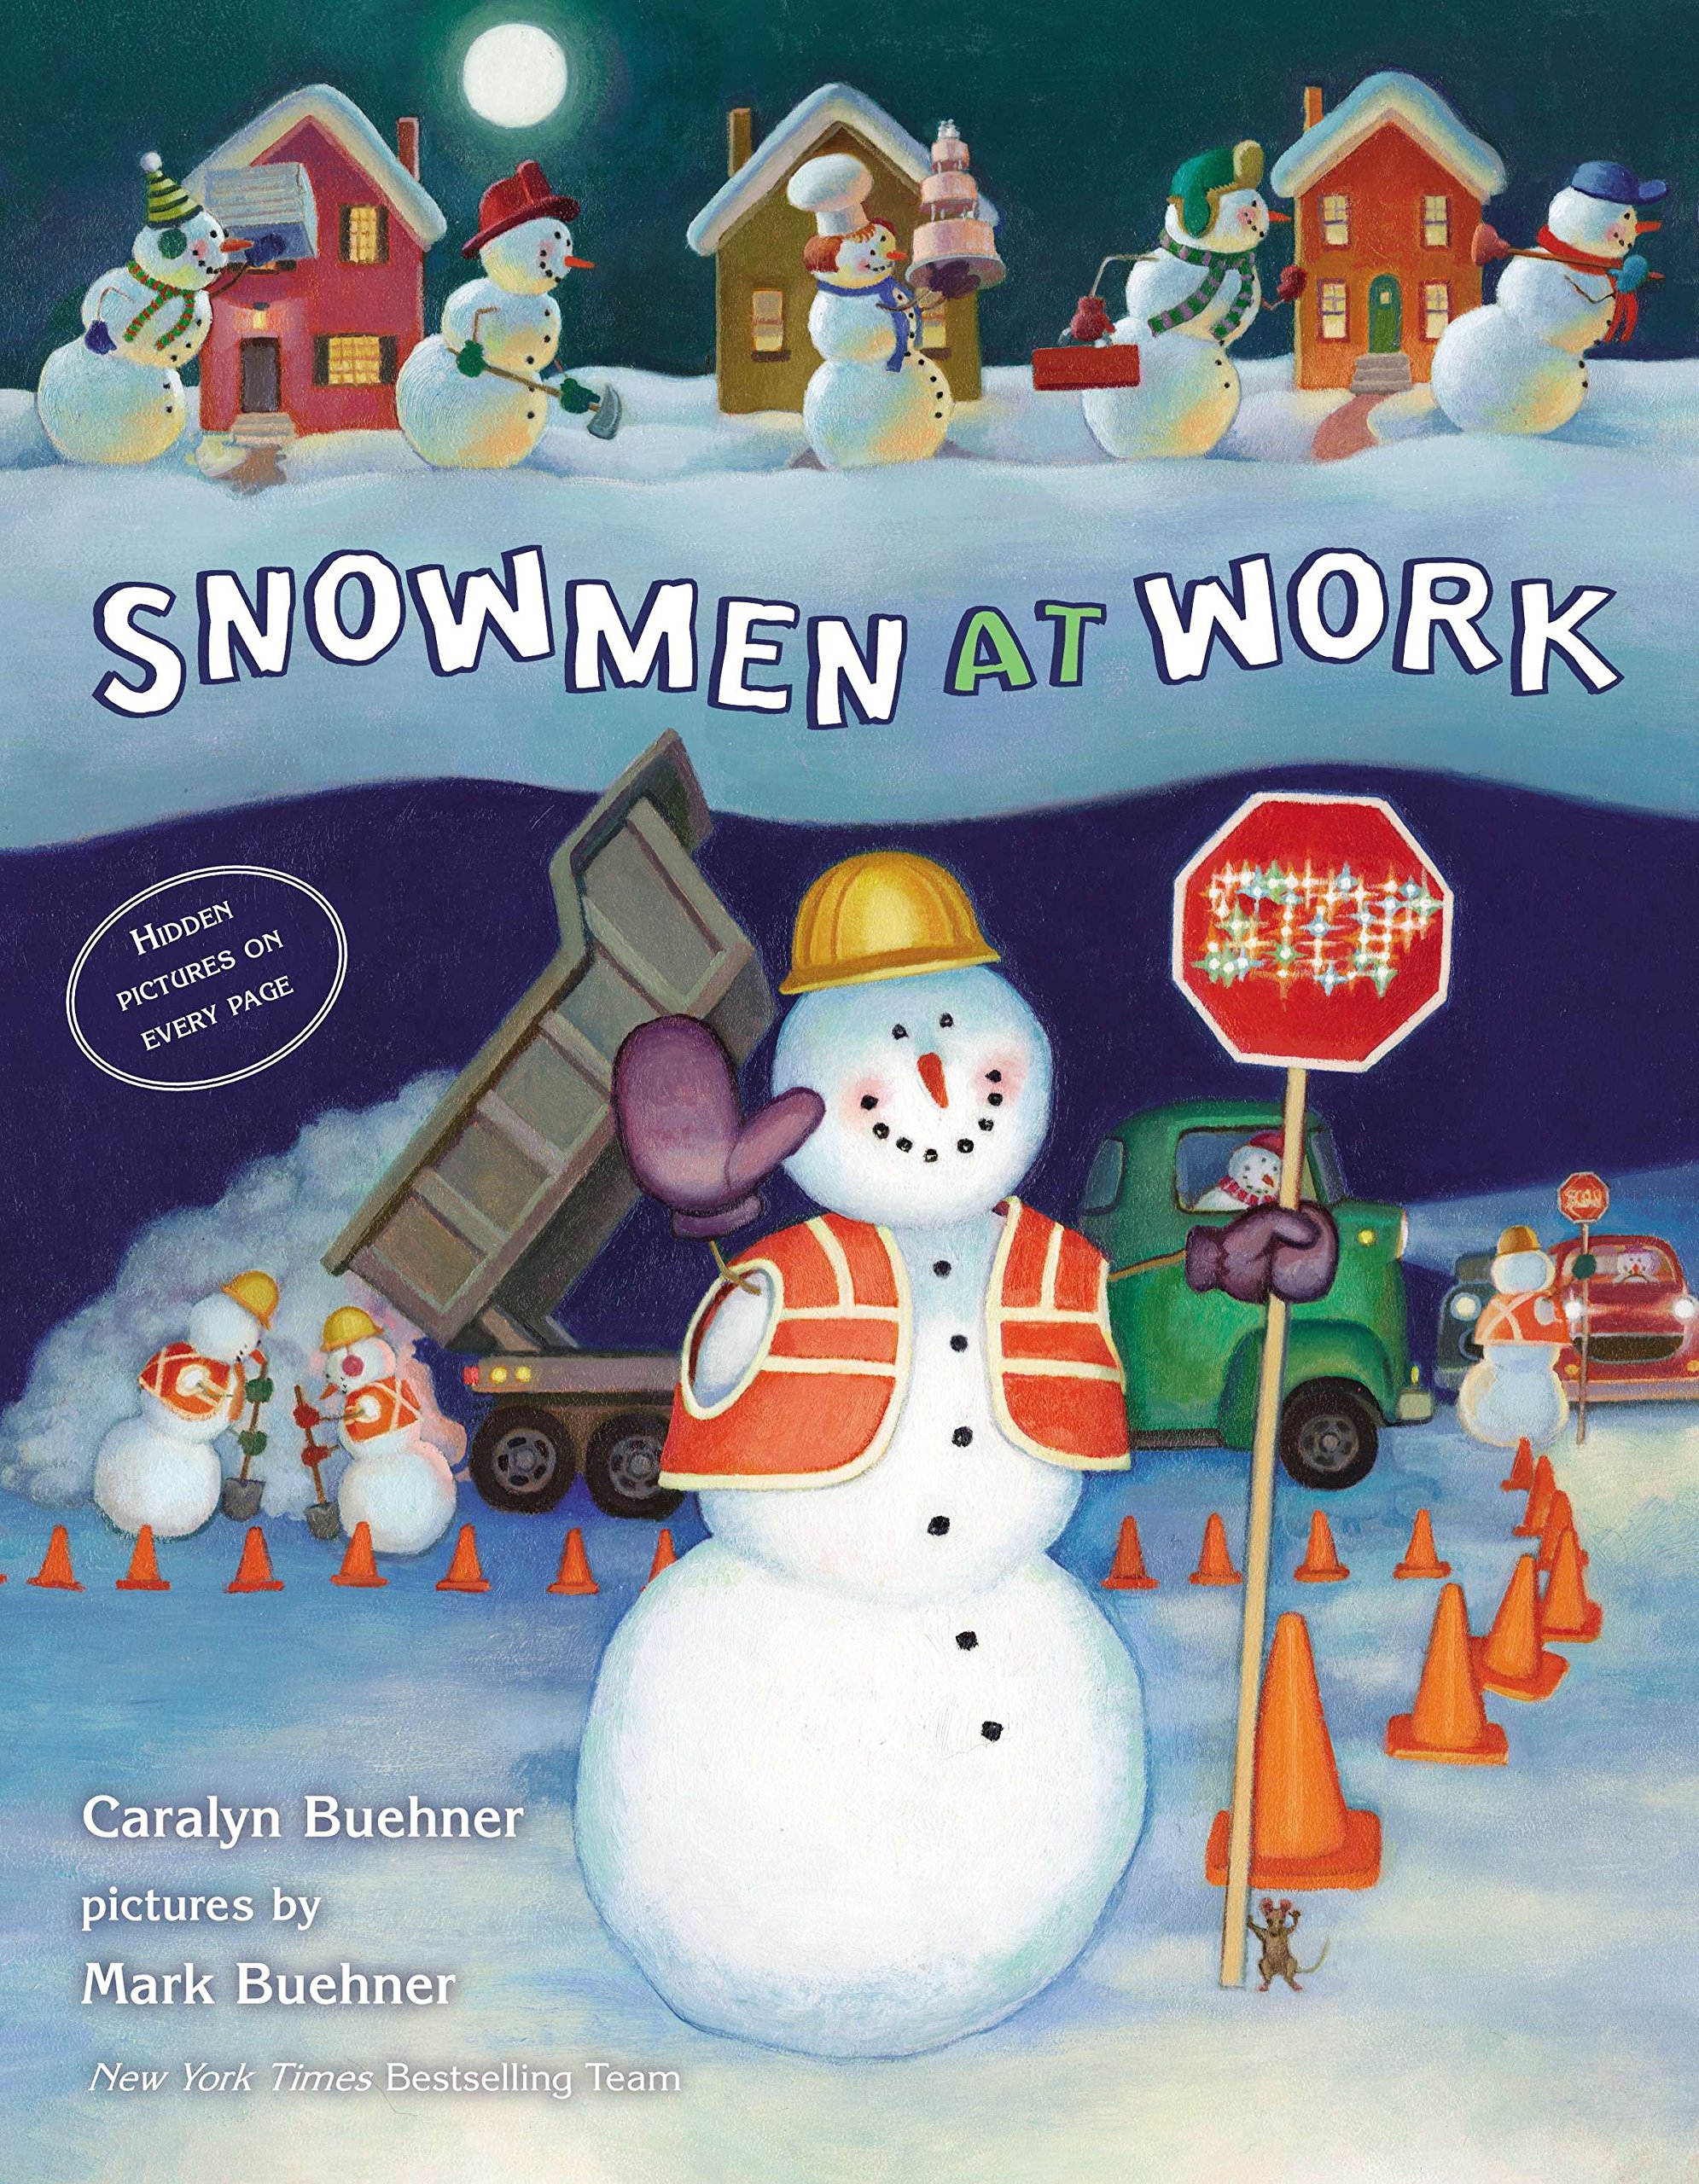 speech and language teaching concepts for Snowmen at Work in speech therapy​ ​